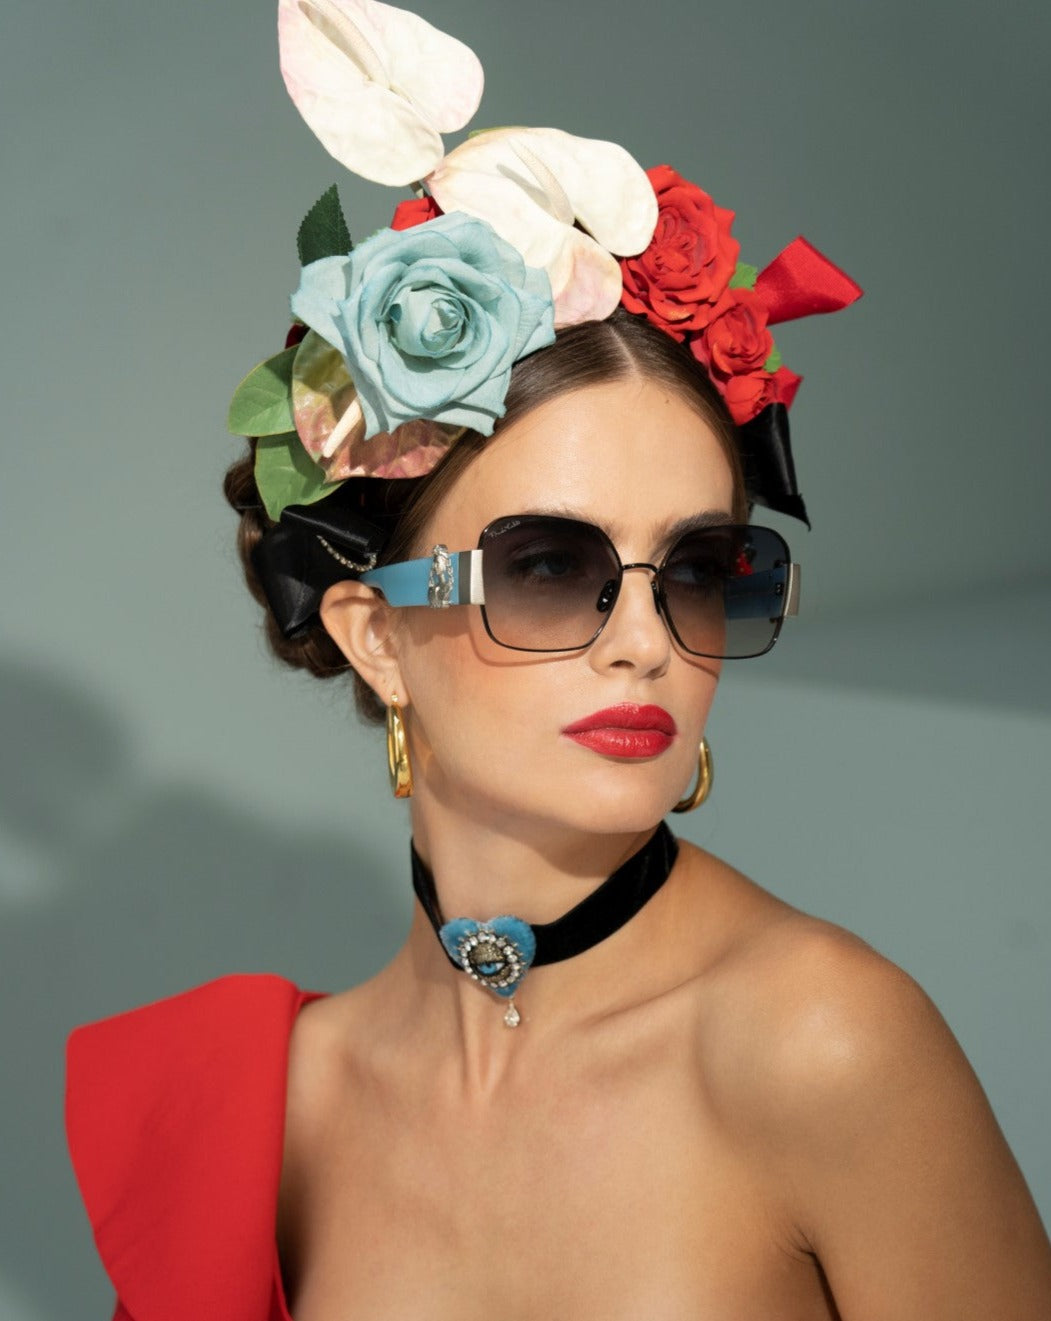 A woman wearing oversized For Art's Sake® Frida Mask with ultra-lightweight Nylon lenses, a black choker with a blue brooch, and a red off-the-shoulder outfit. She has red lipstick and a floral headpiece adorned with blue, white, and red flowers. The background is plain and grey.